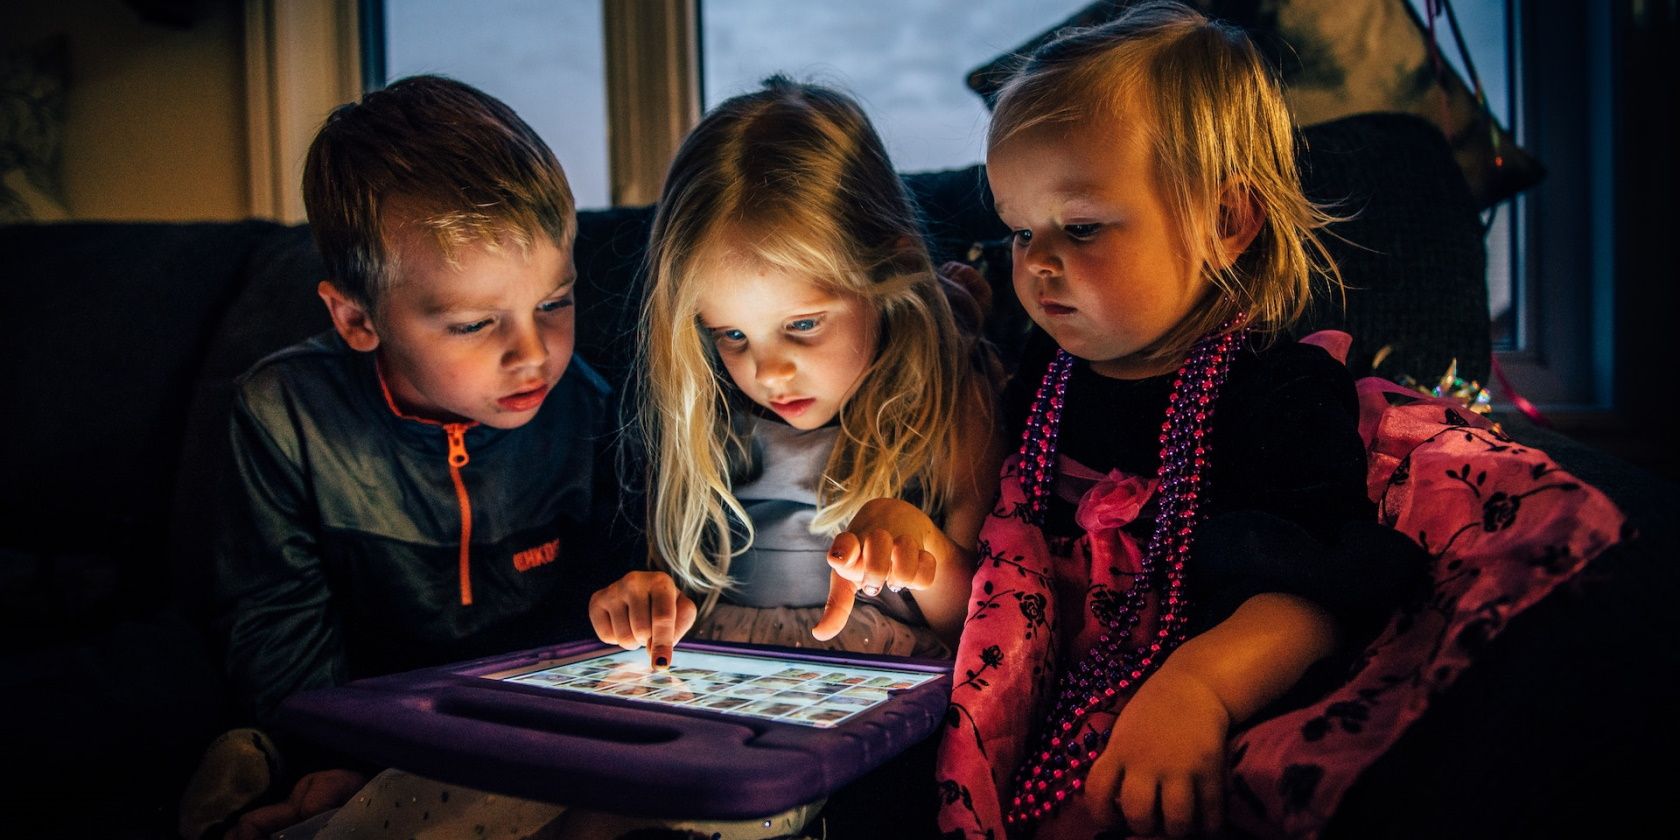 Kids interacting with a tablet